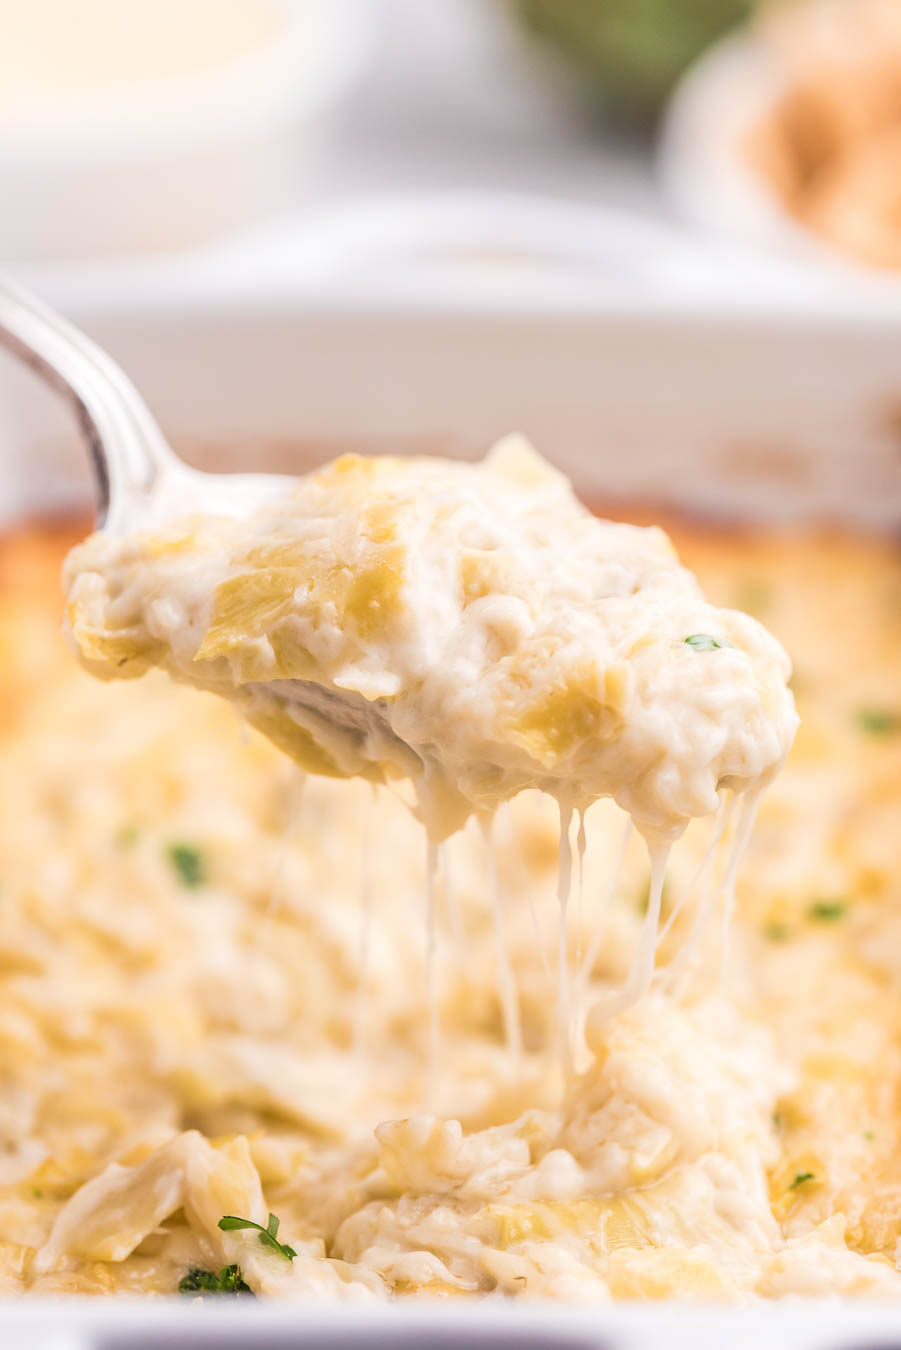 spoonful of melty cheesy artichoke dip from the baking dish